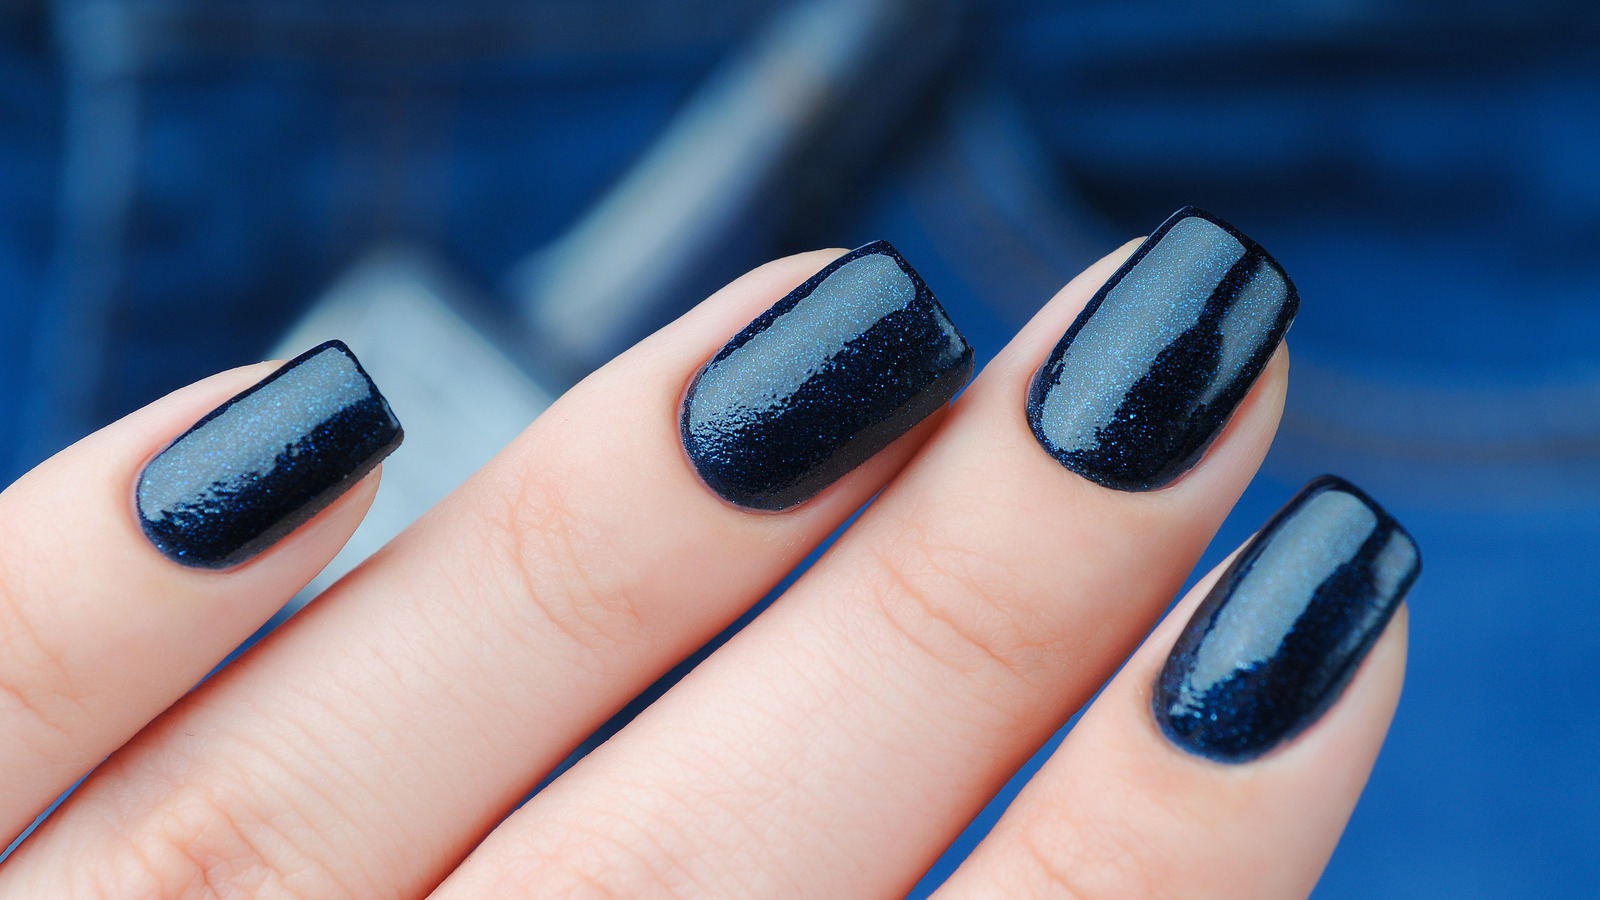 3. "Trendy Winter Nail Colors That Will Elevate Your Look" - wide 3